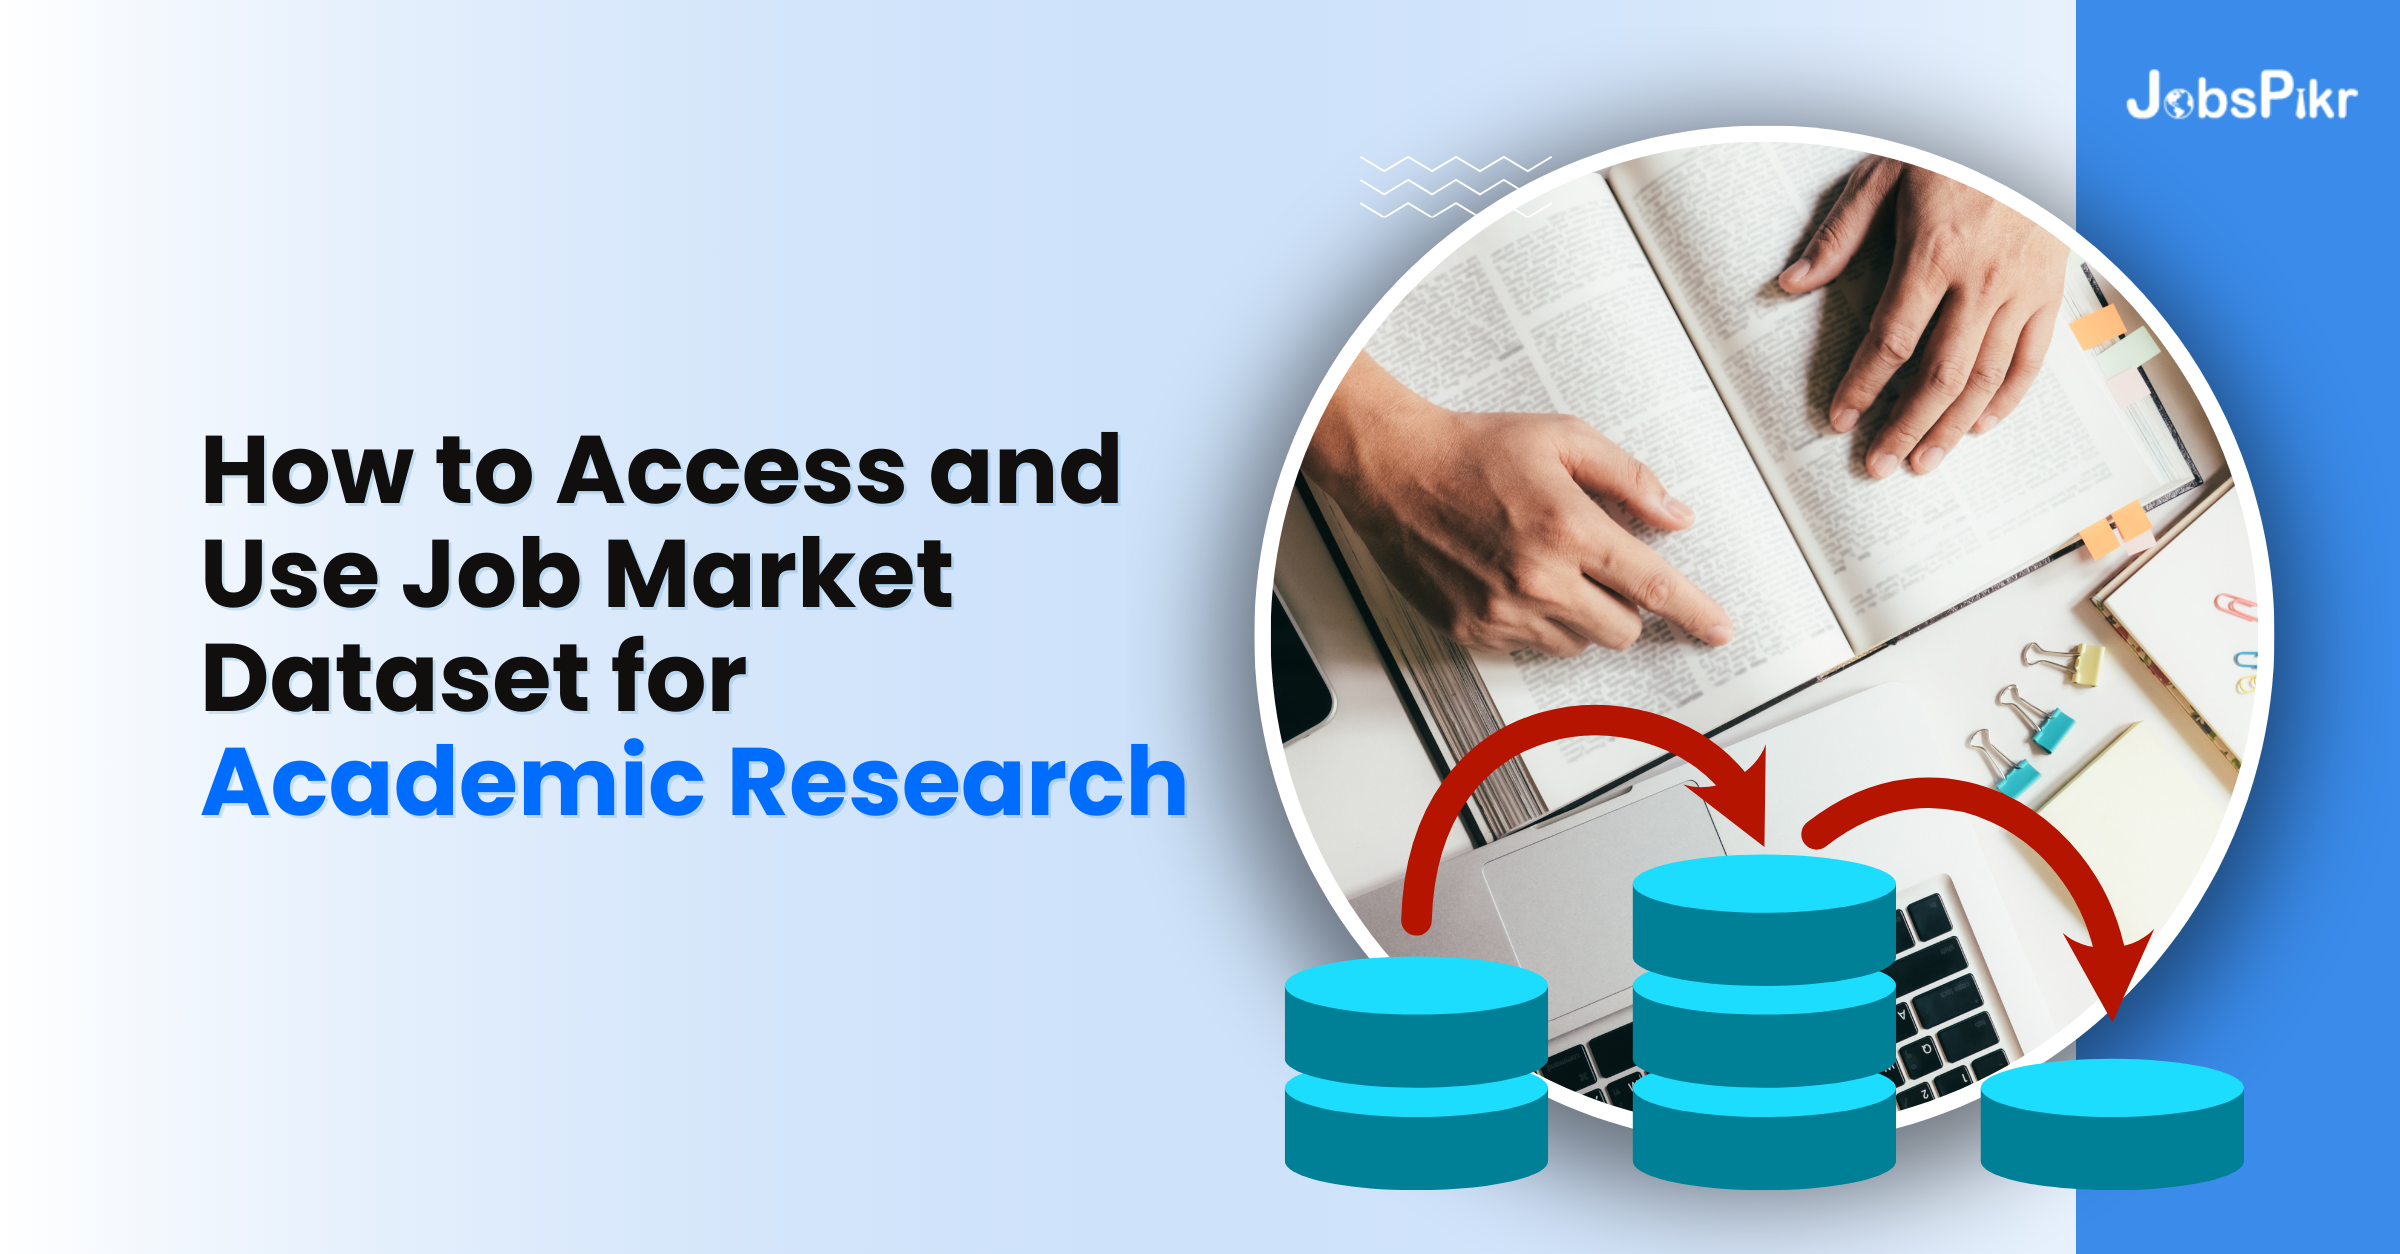 How to Access and Use Job Market Dataset for Academic Research